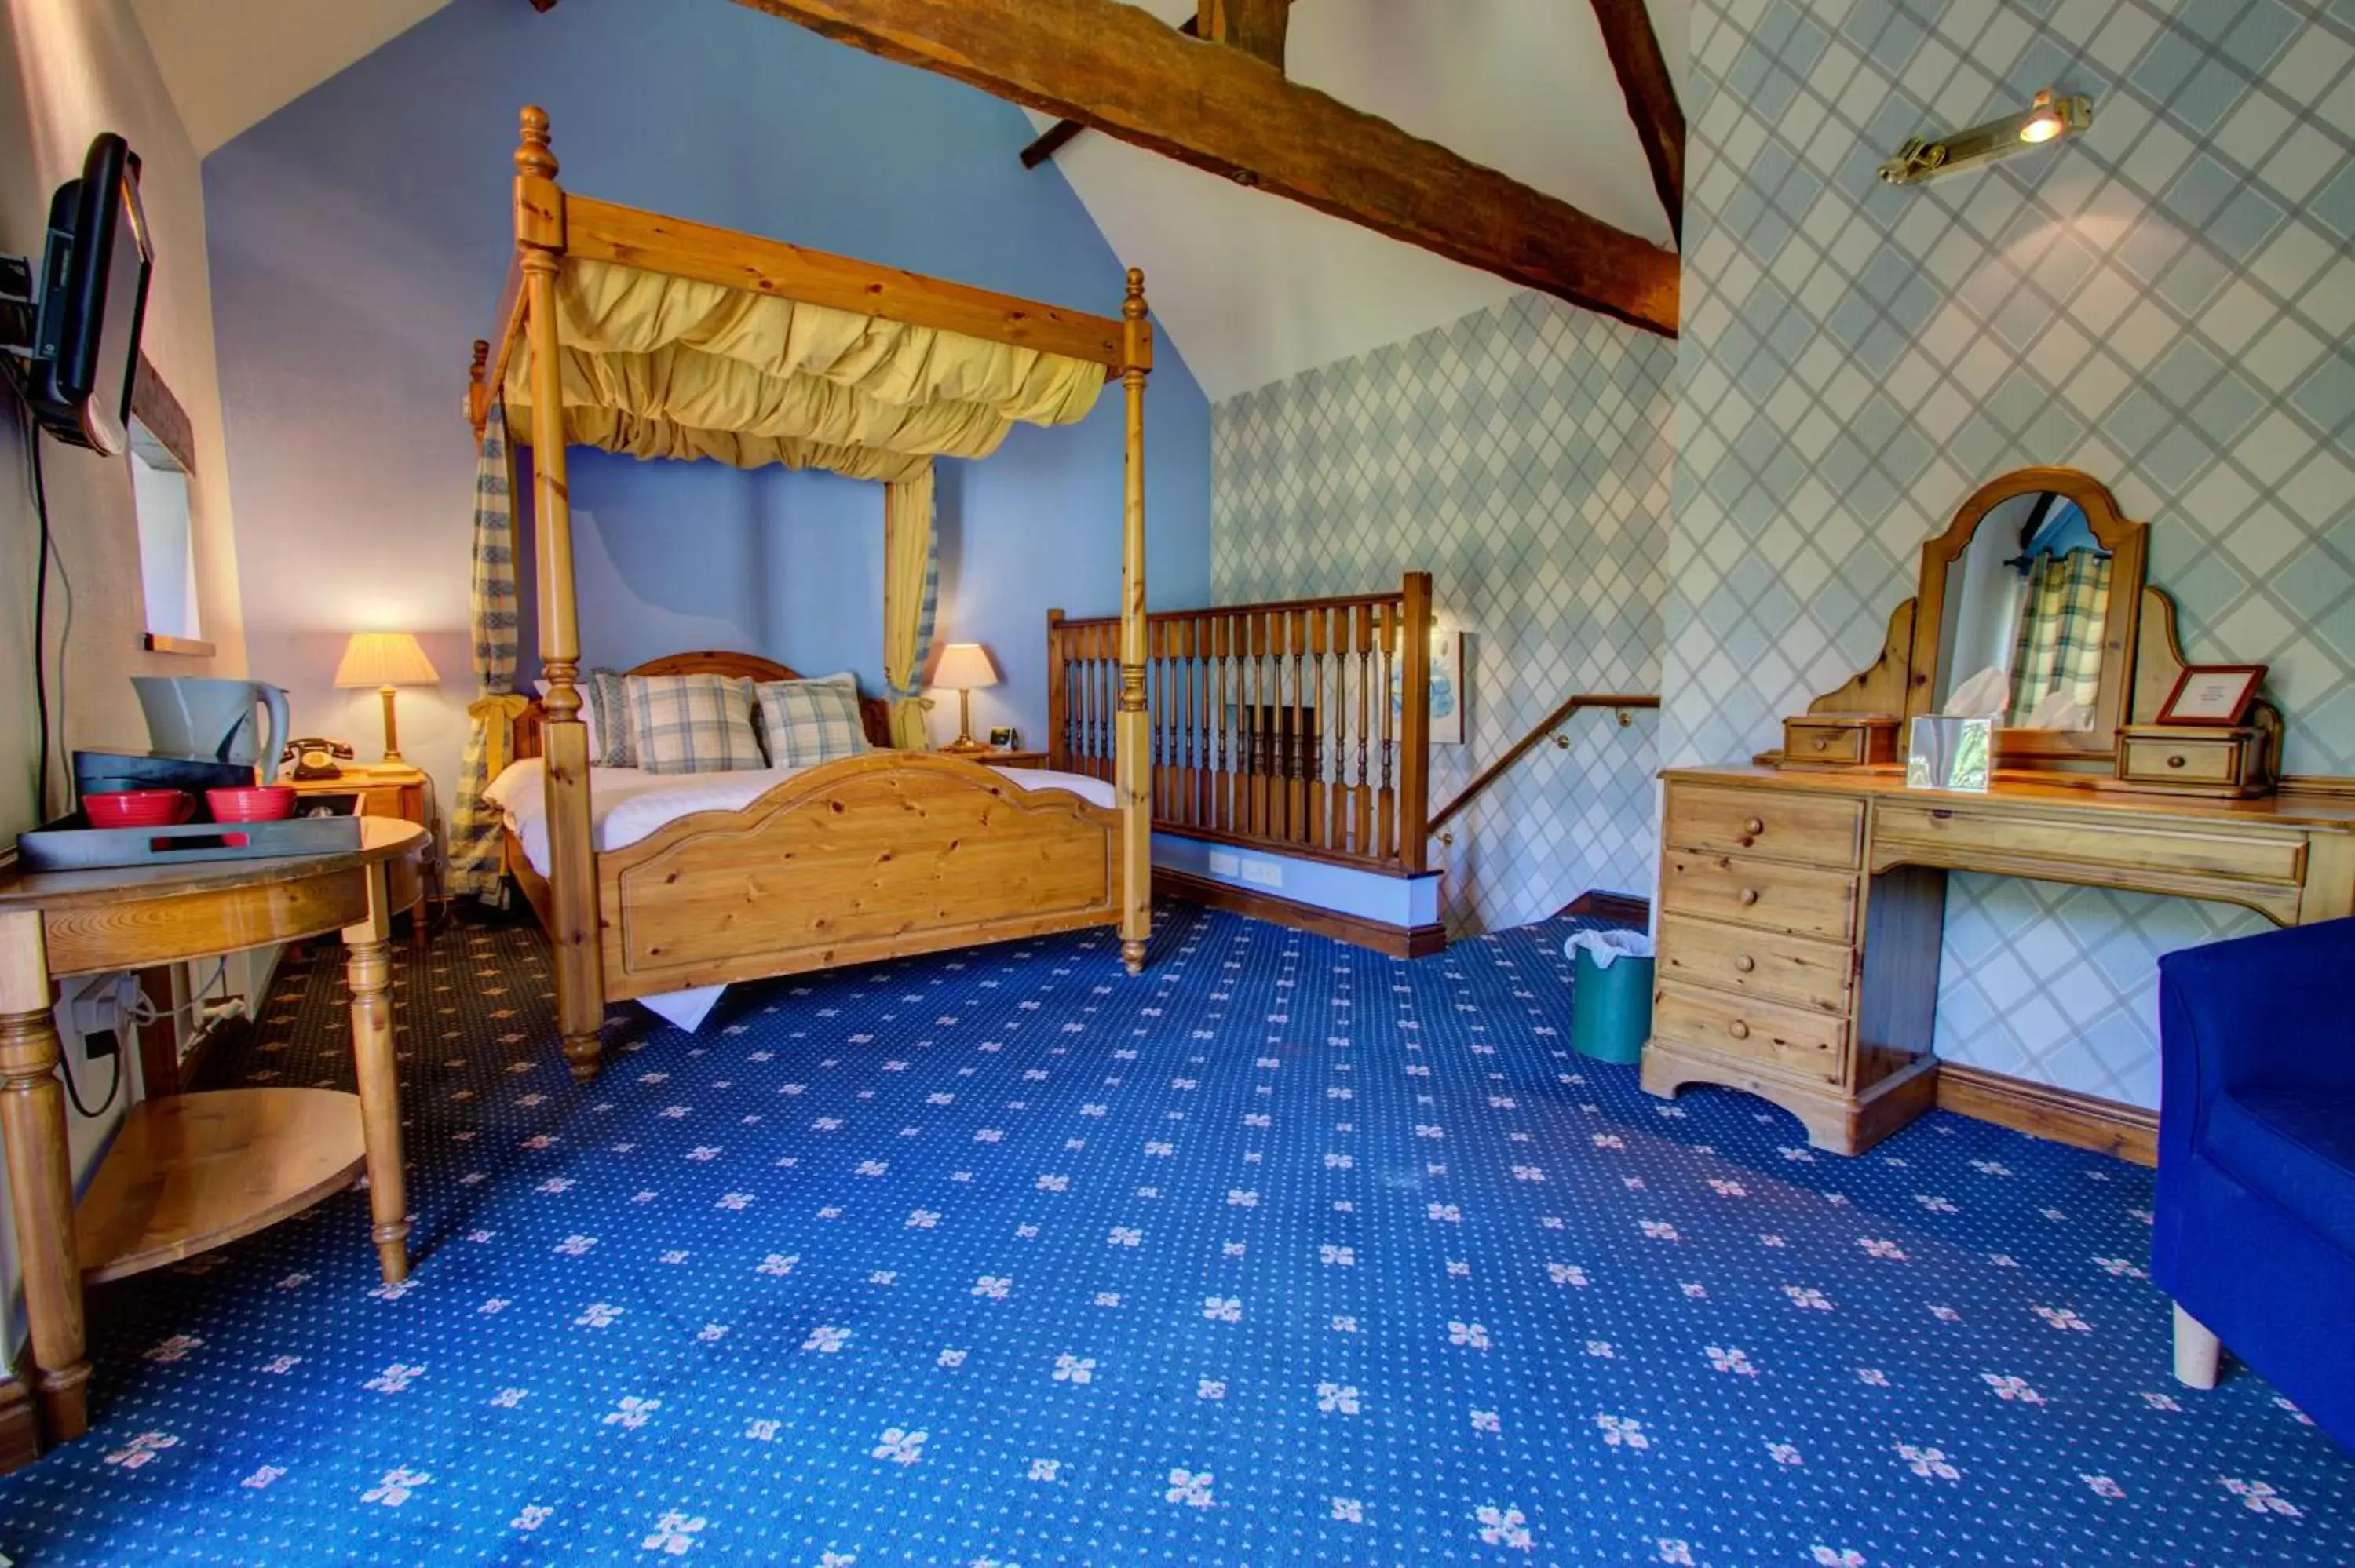 Bedroom in The Ennerdale Country House Hotel ‘A Bespoke Hotel’